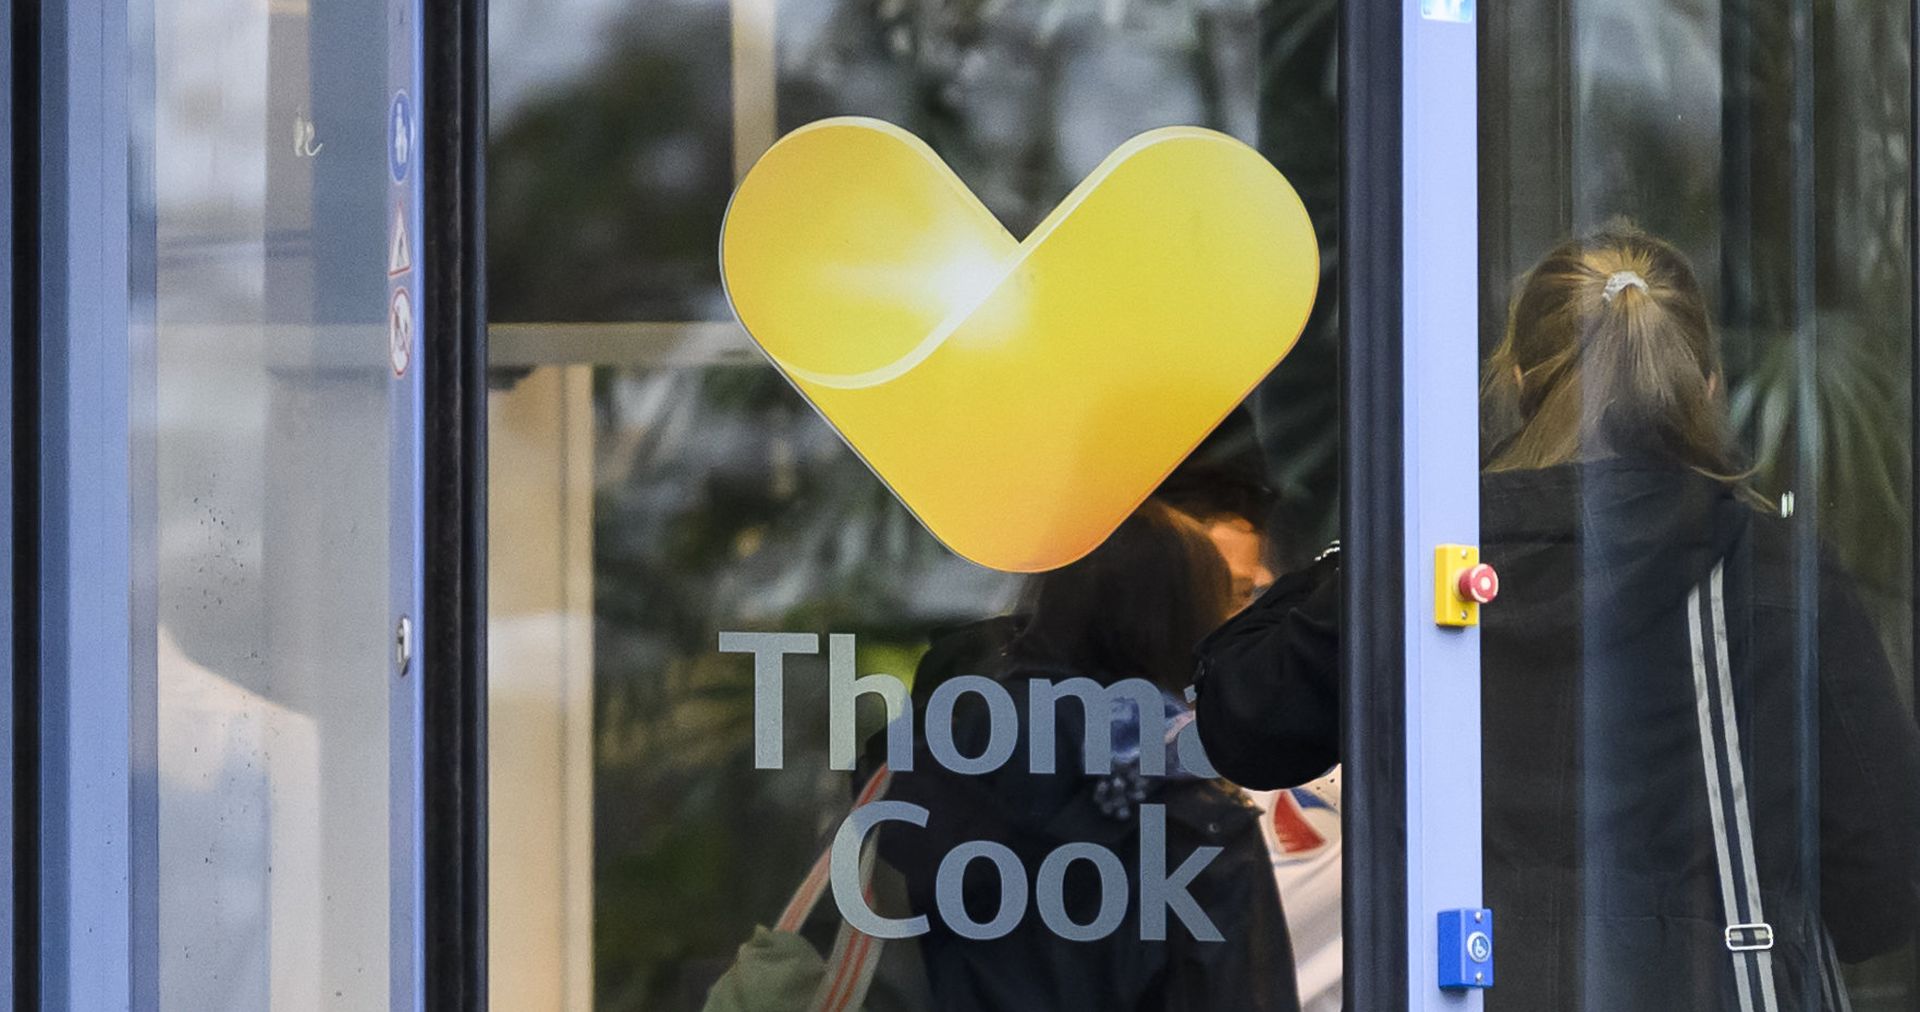 23 September 2019, Hessen, Oberursel: A woman goes to the headquarters of the German branch of the British travel group Thomas Cook. Thomas Cook, one of Britain's biggest travel firms, filed for liquidation early Monday, ceasing all trading with immediate effect, a move that could potentially leave thousands of holidaymakers stranded. Photo: Silas Stein/dpa